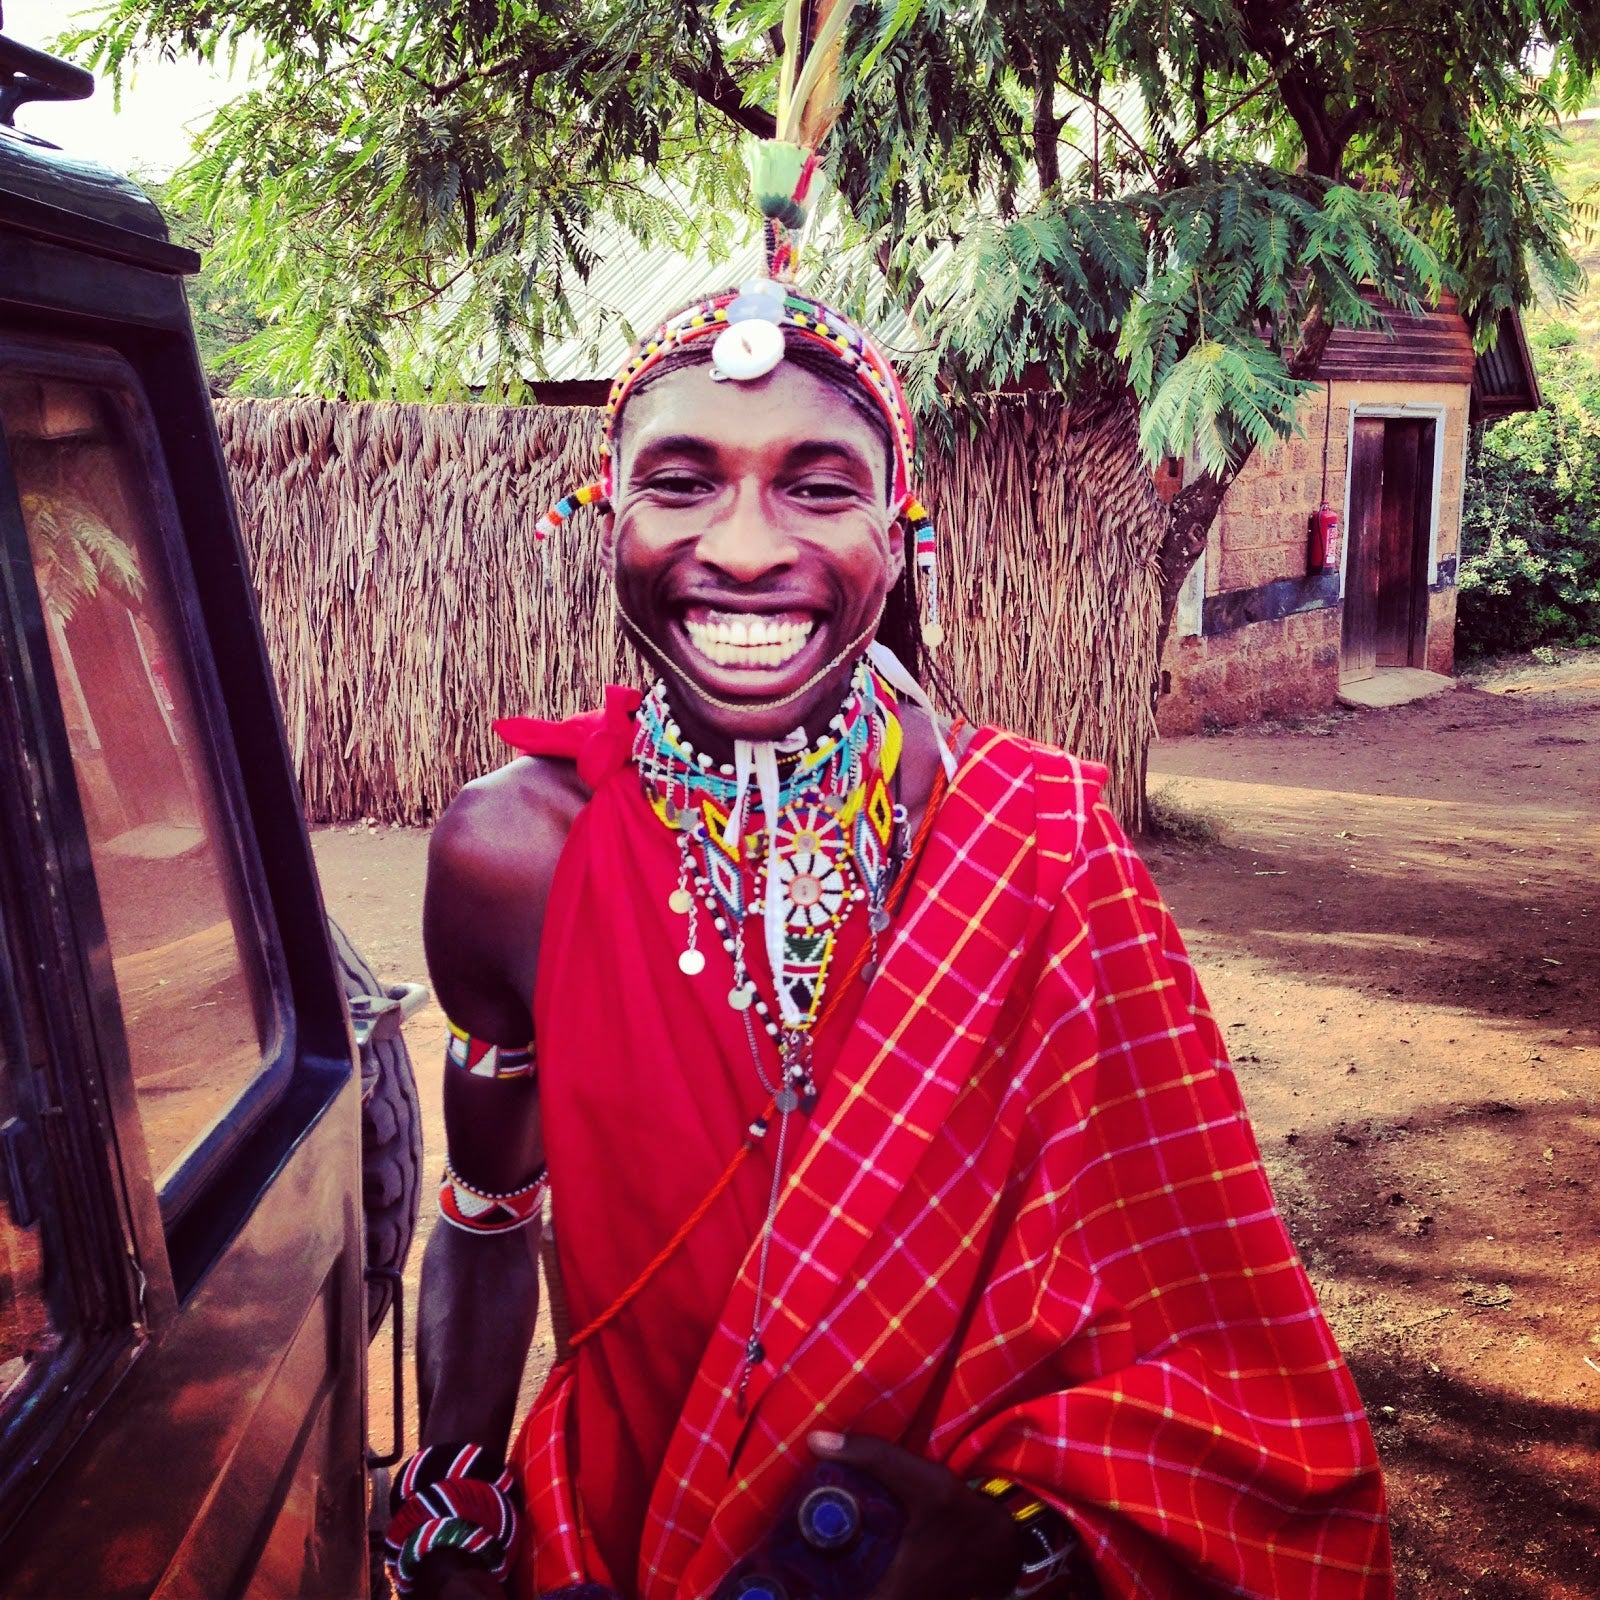 The Magnificent Masai - Our Trip to Africa